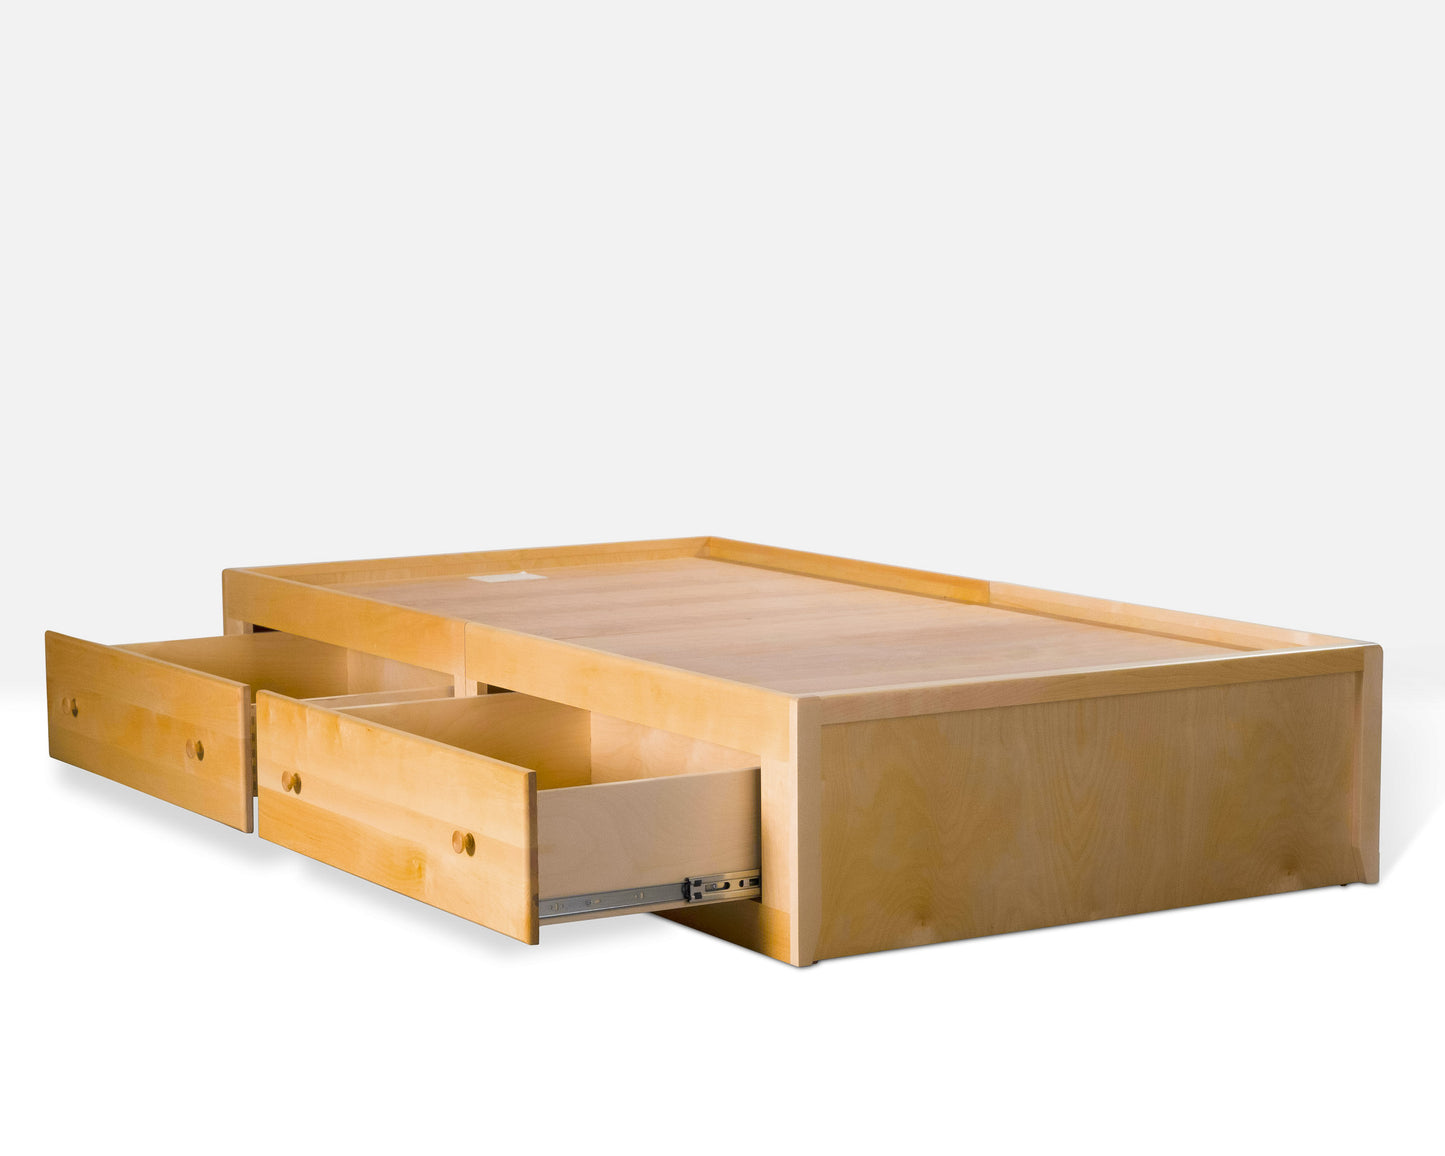 Acadia Shaker Storage Bed with two drawers, shown open and without mattress to highlight storage.